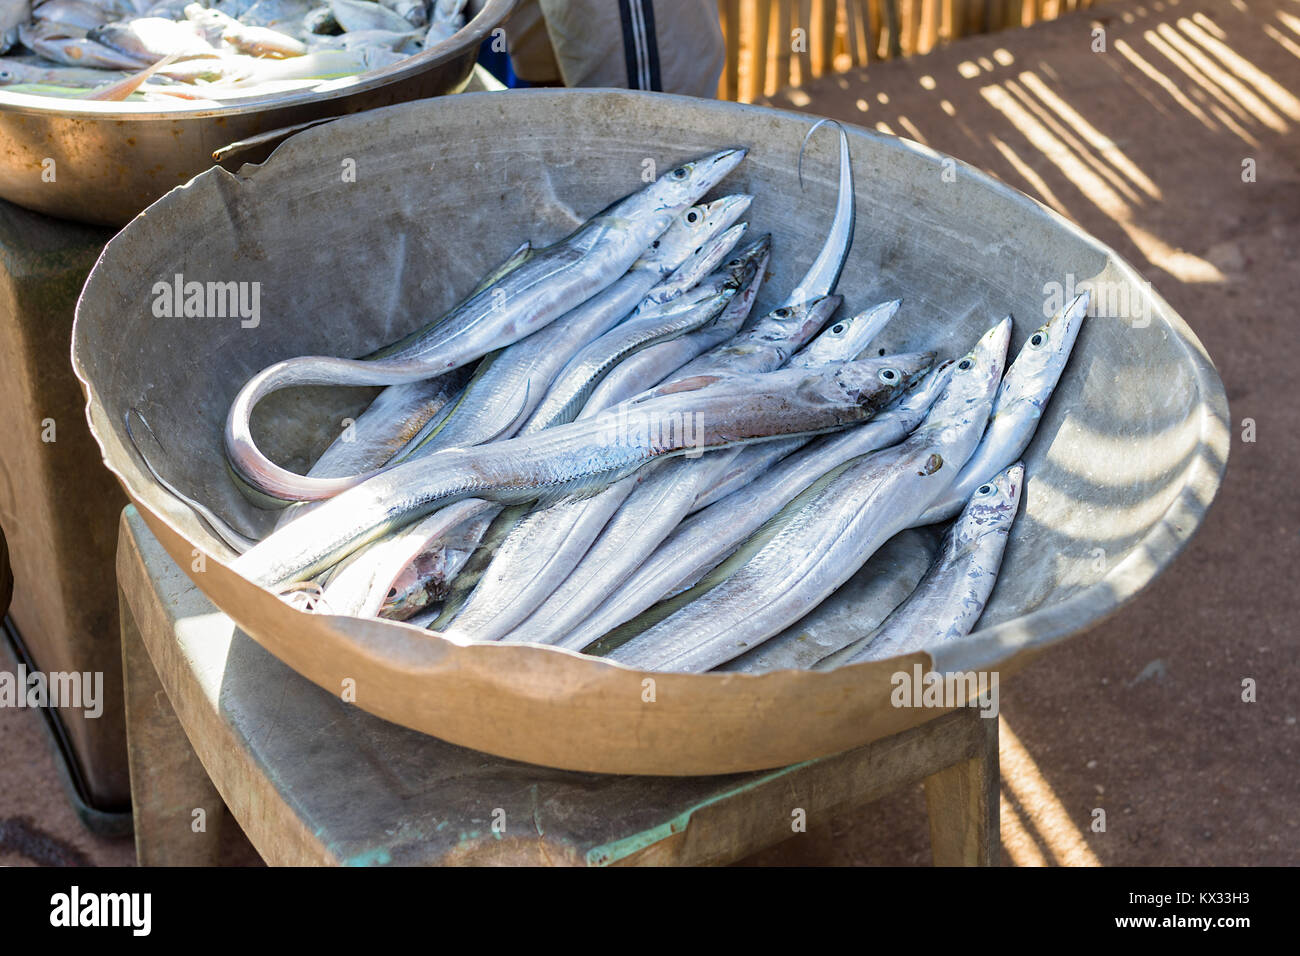 A bowl of freshly caught long silver salt water fish for sale on a Indonesia street. Stock Photo